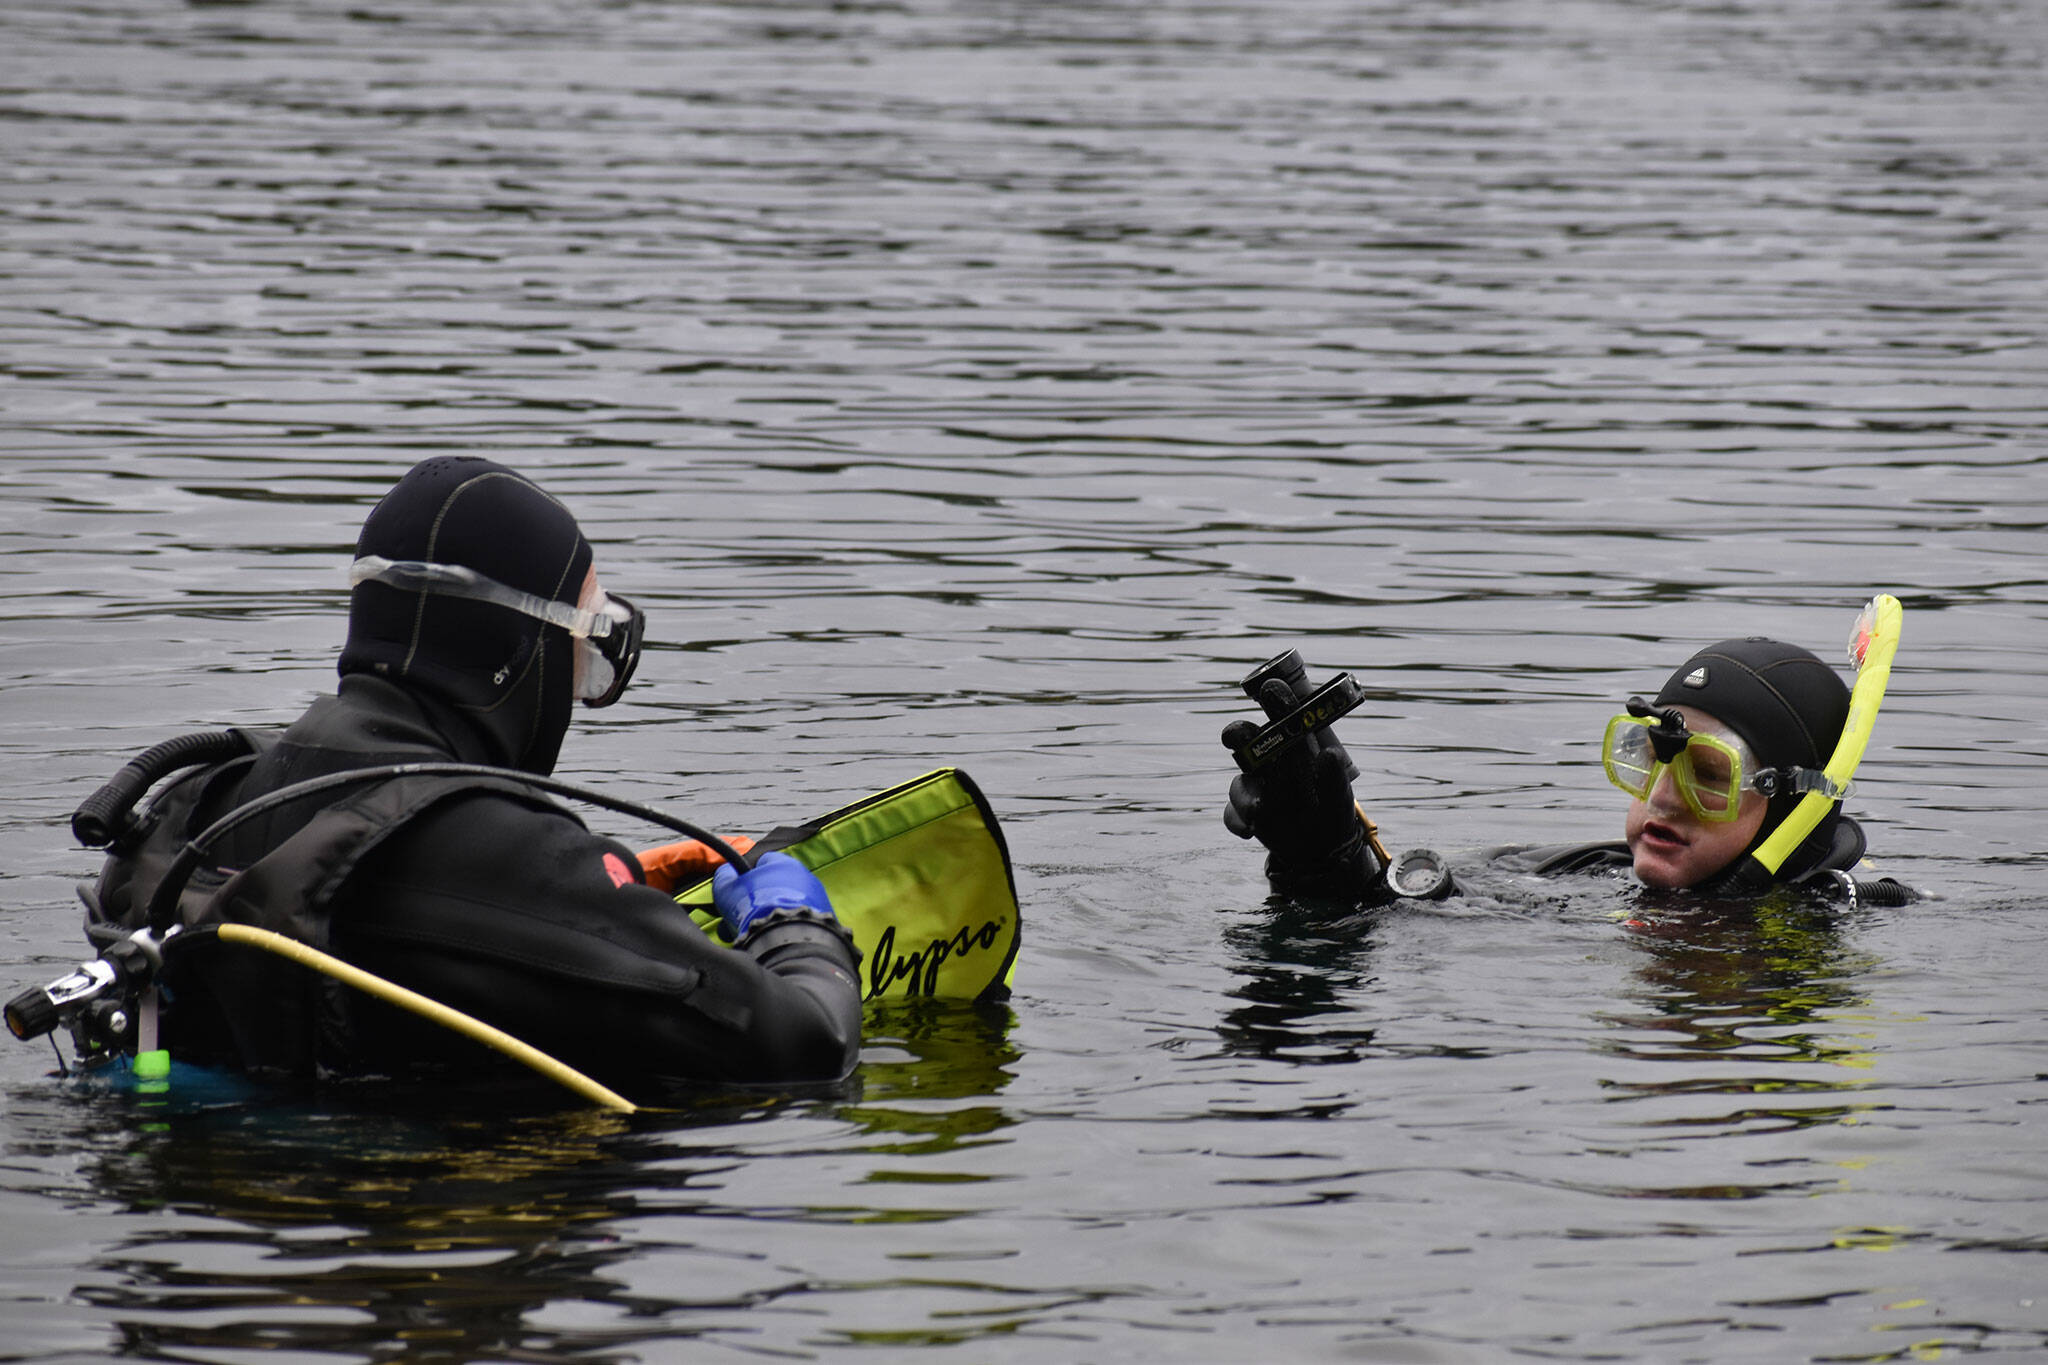 Divers make final preparations before submerging in Lake Sawyer.